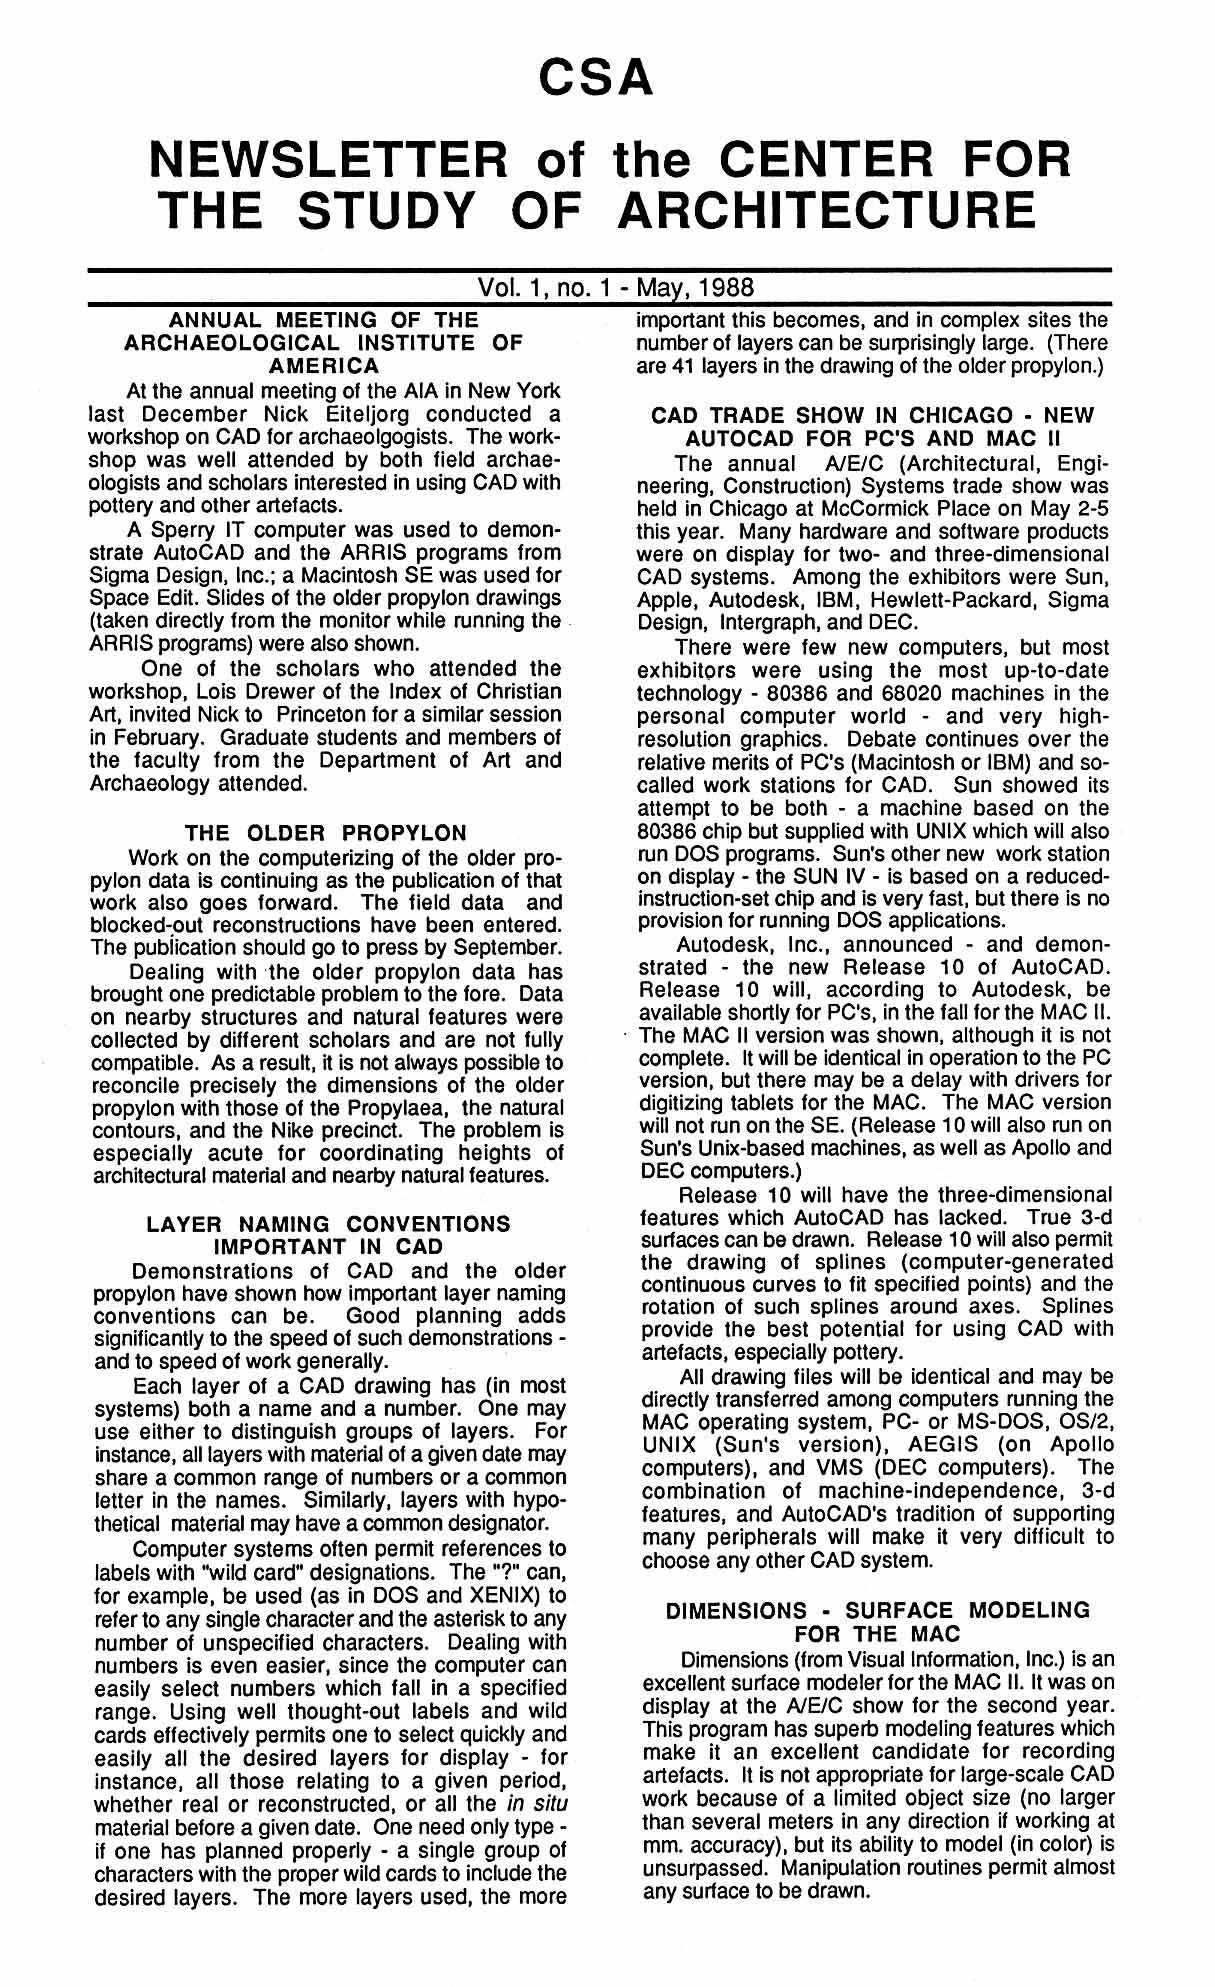 Scanned Image of Page 1, vol 1 no 1